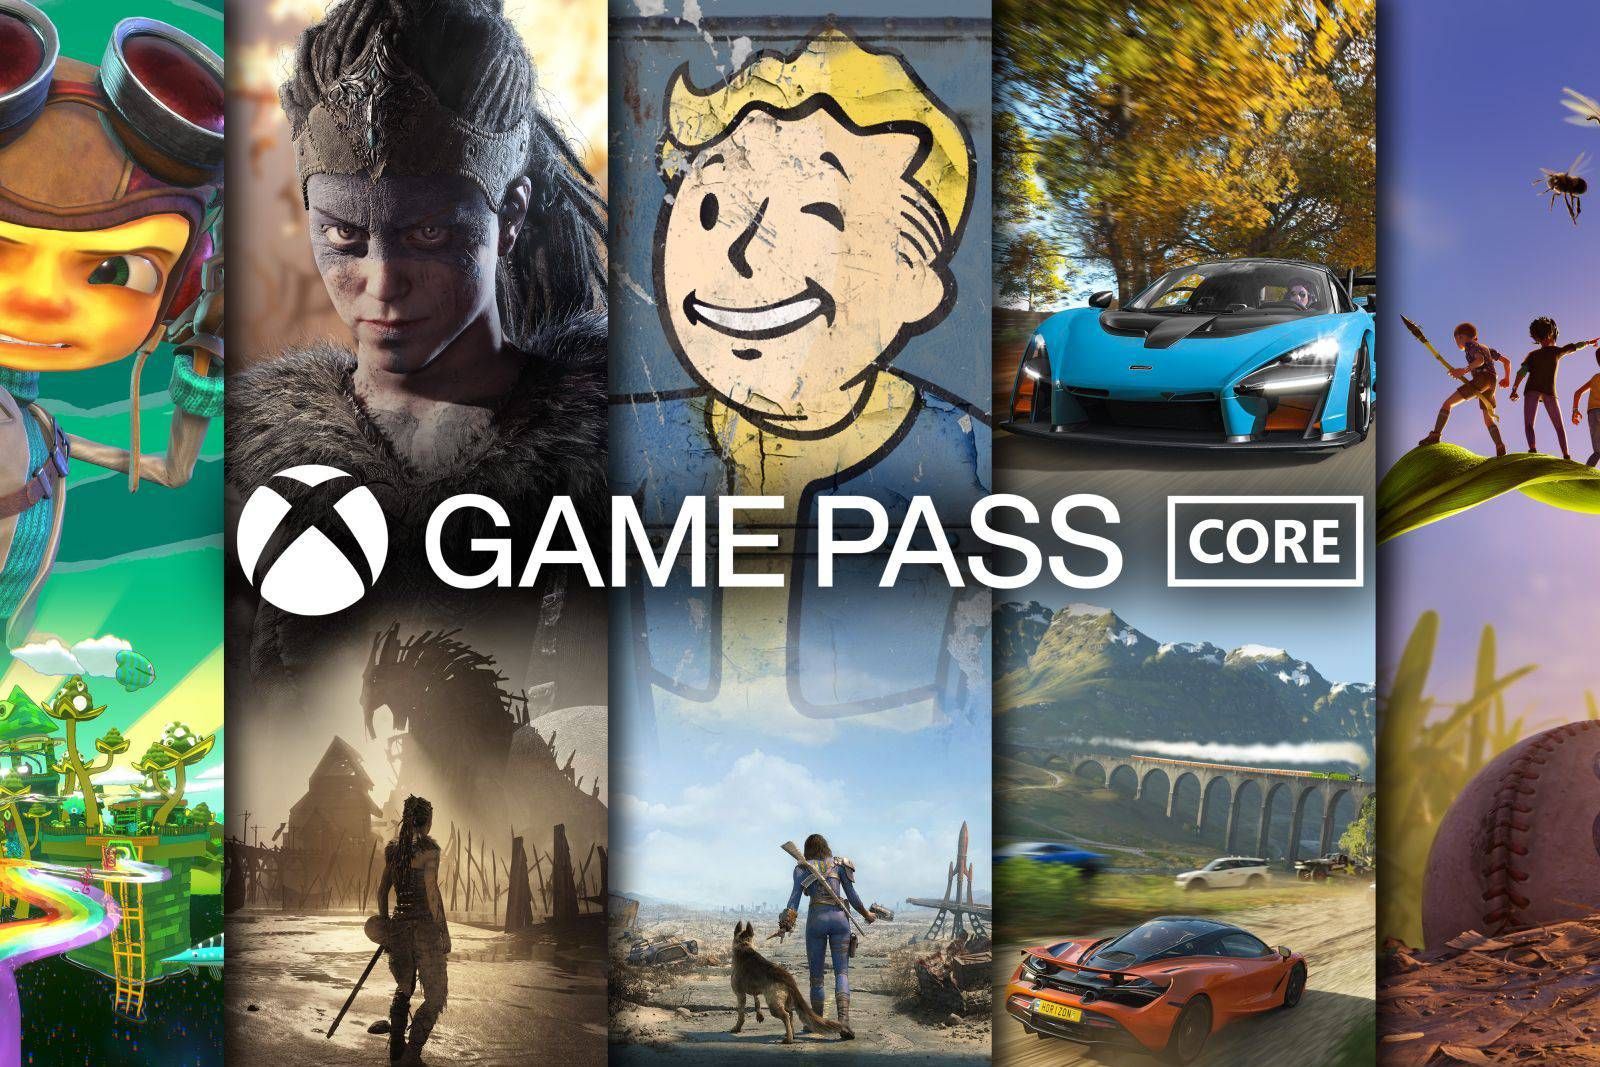 What is Game Pass Core